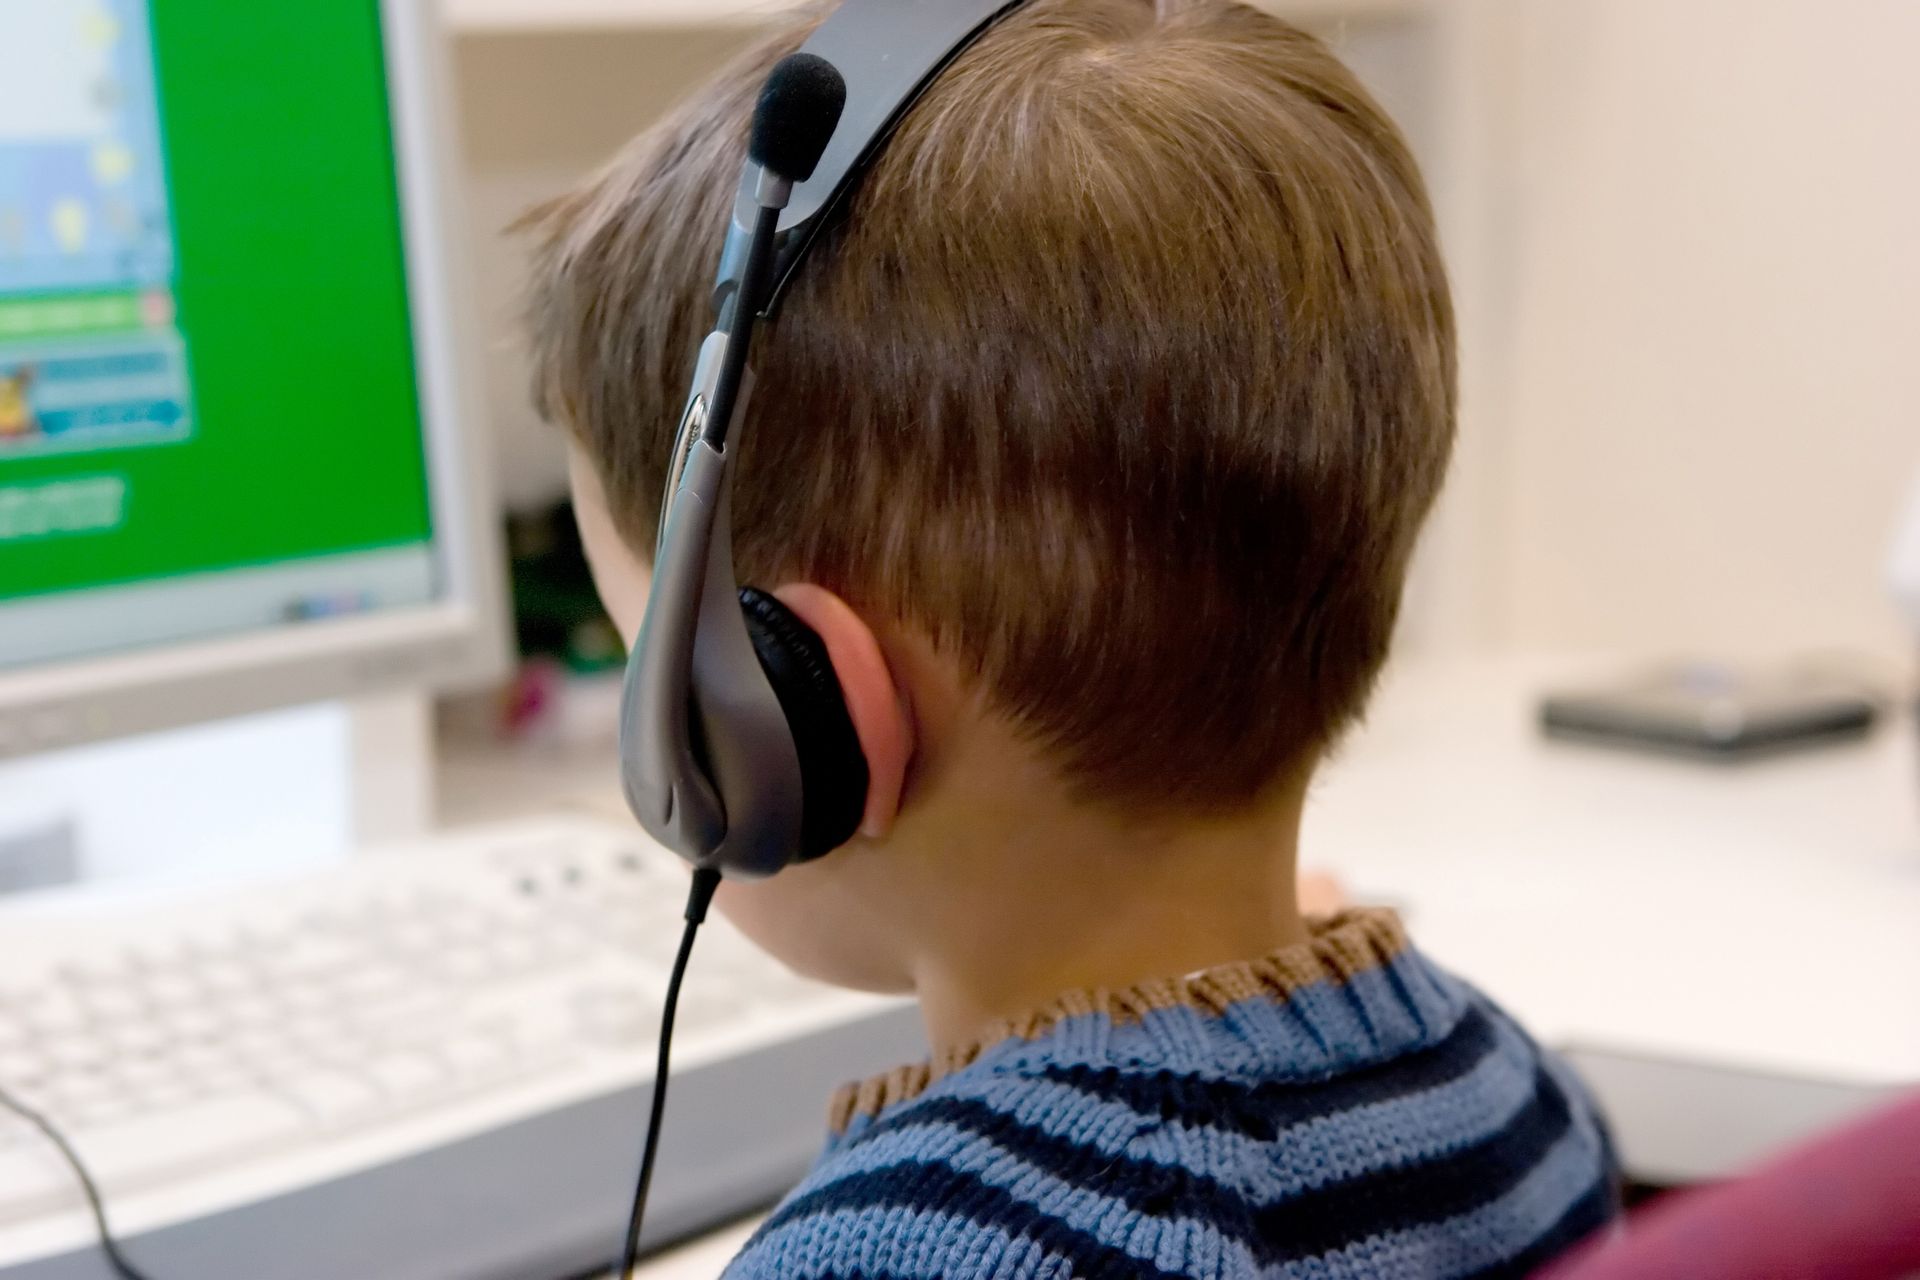 An image of a young boy playing on the computer with headphones.